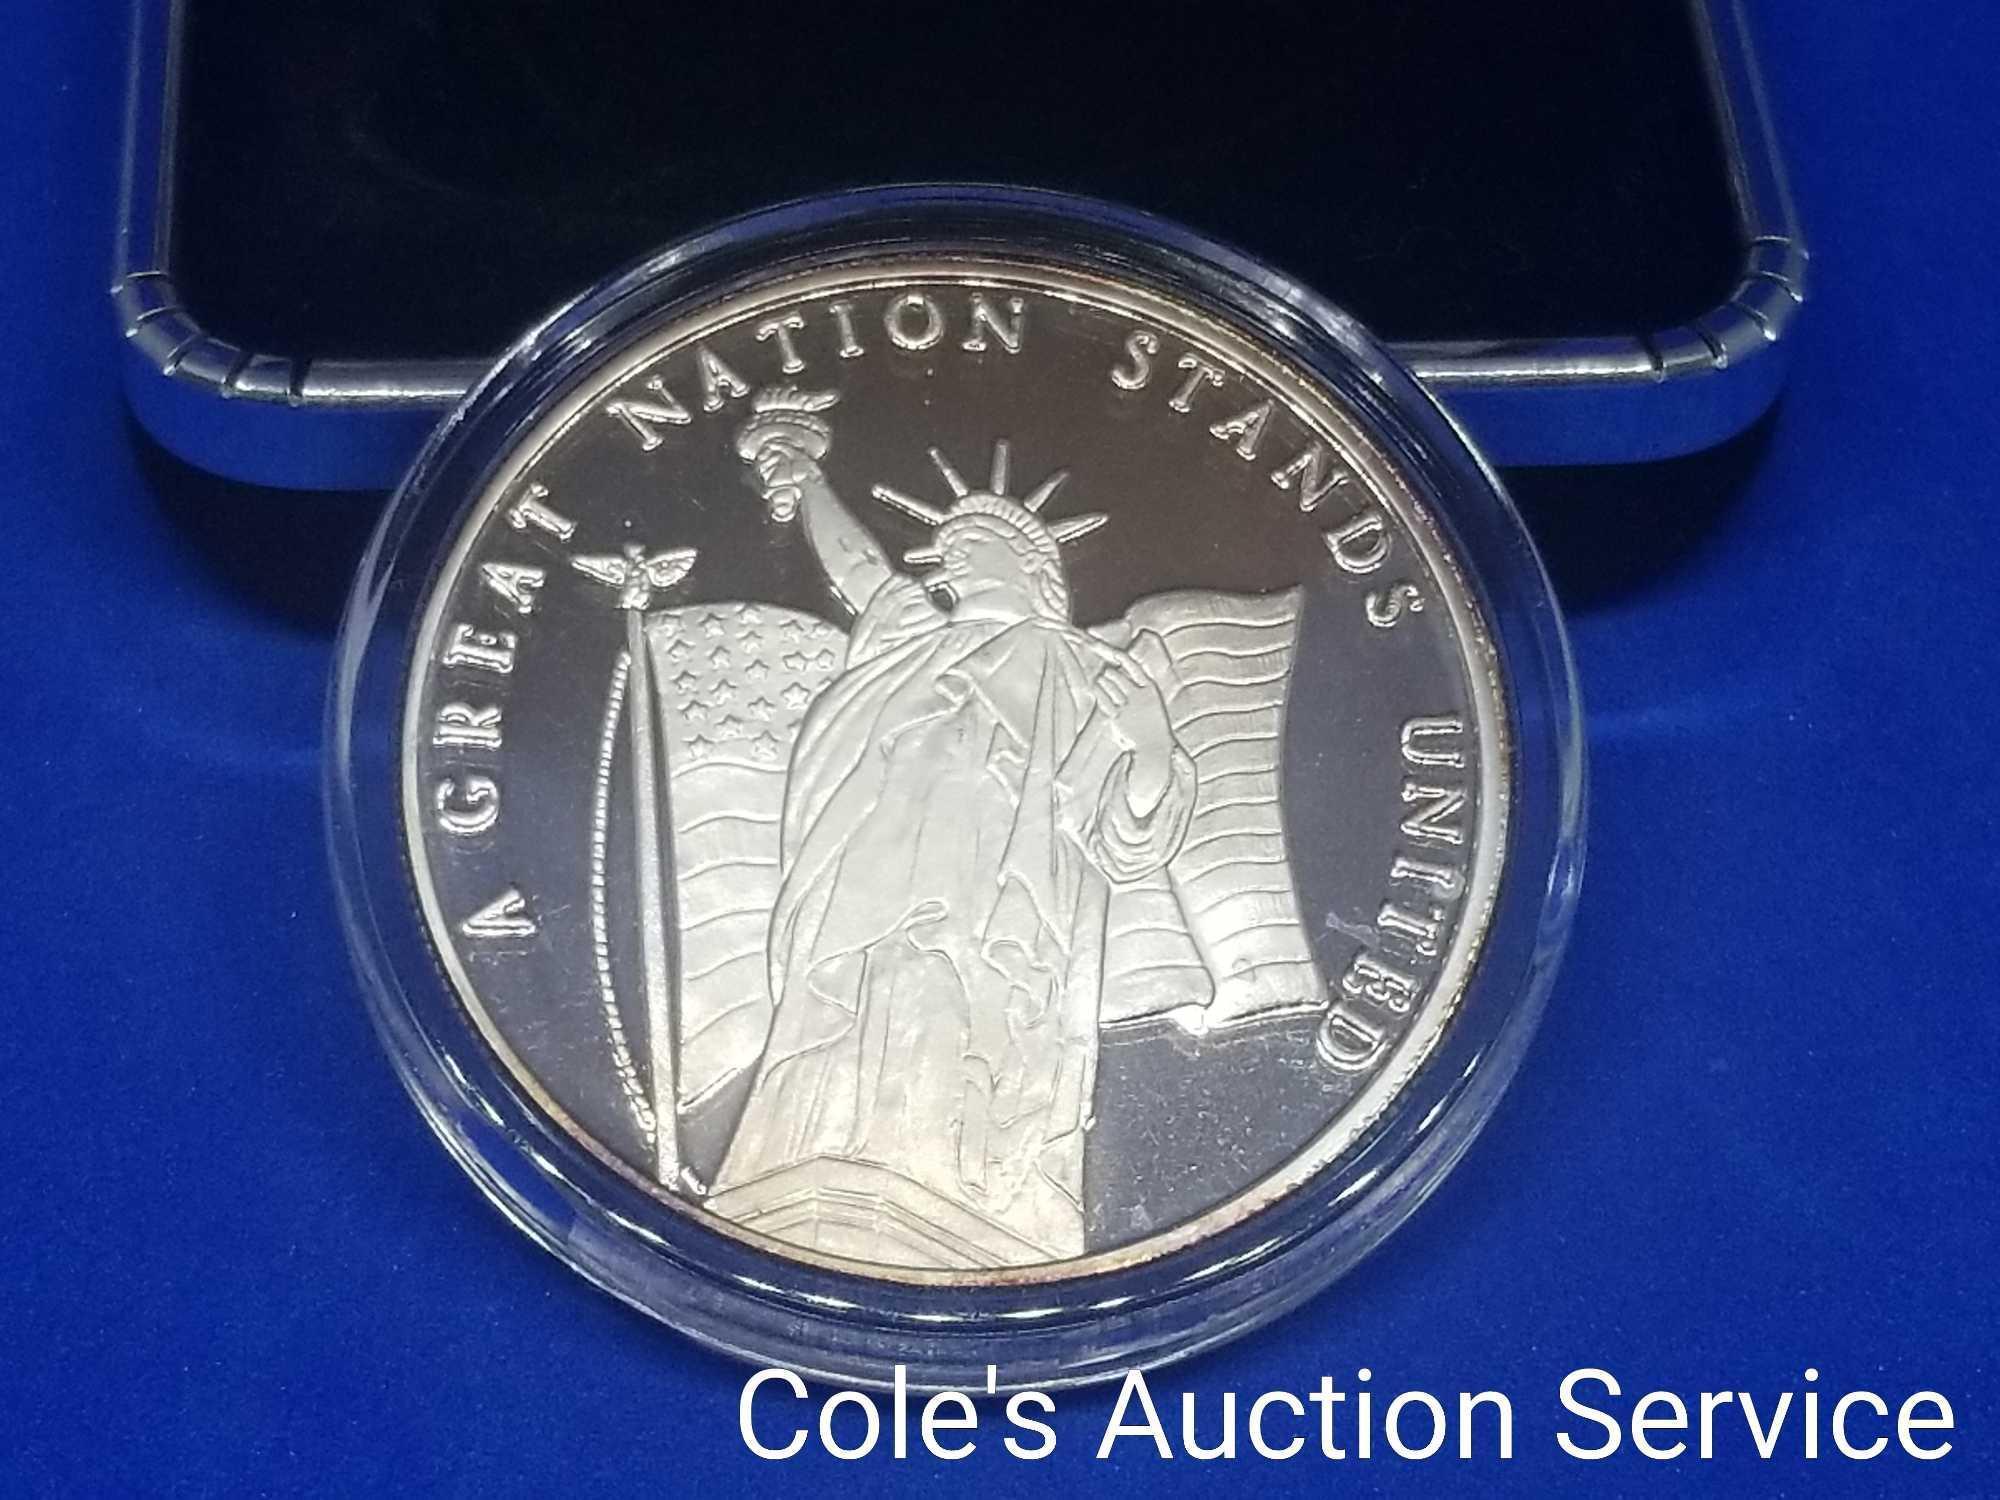 Coins of America Land of the Free one troy ounce fine silver coin. Beautiful mirror-like finish in